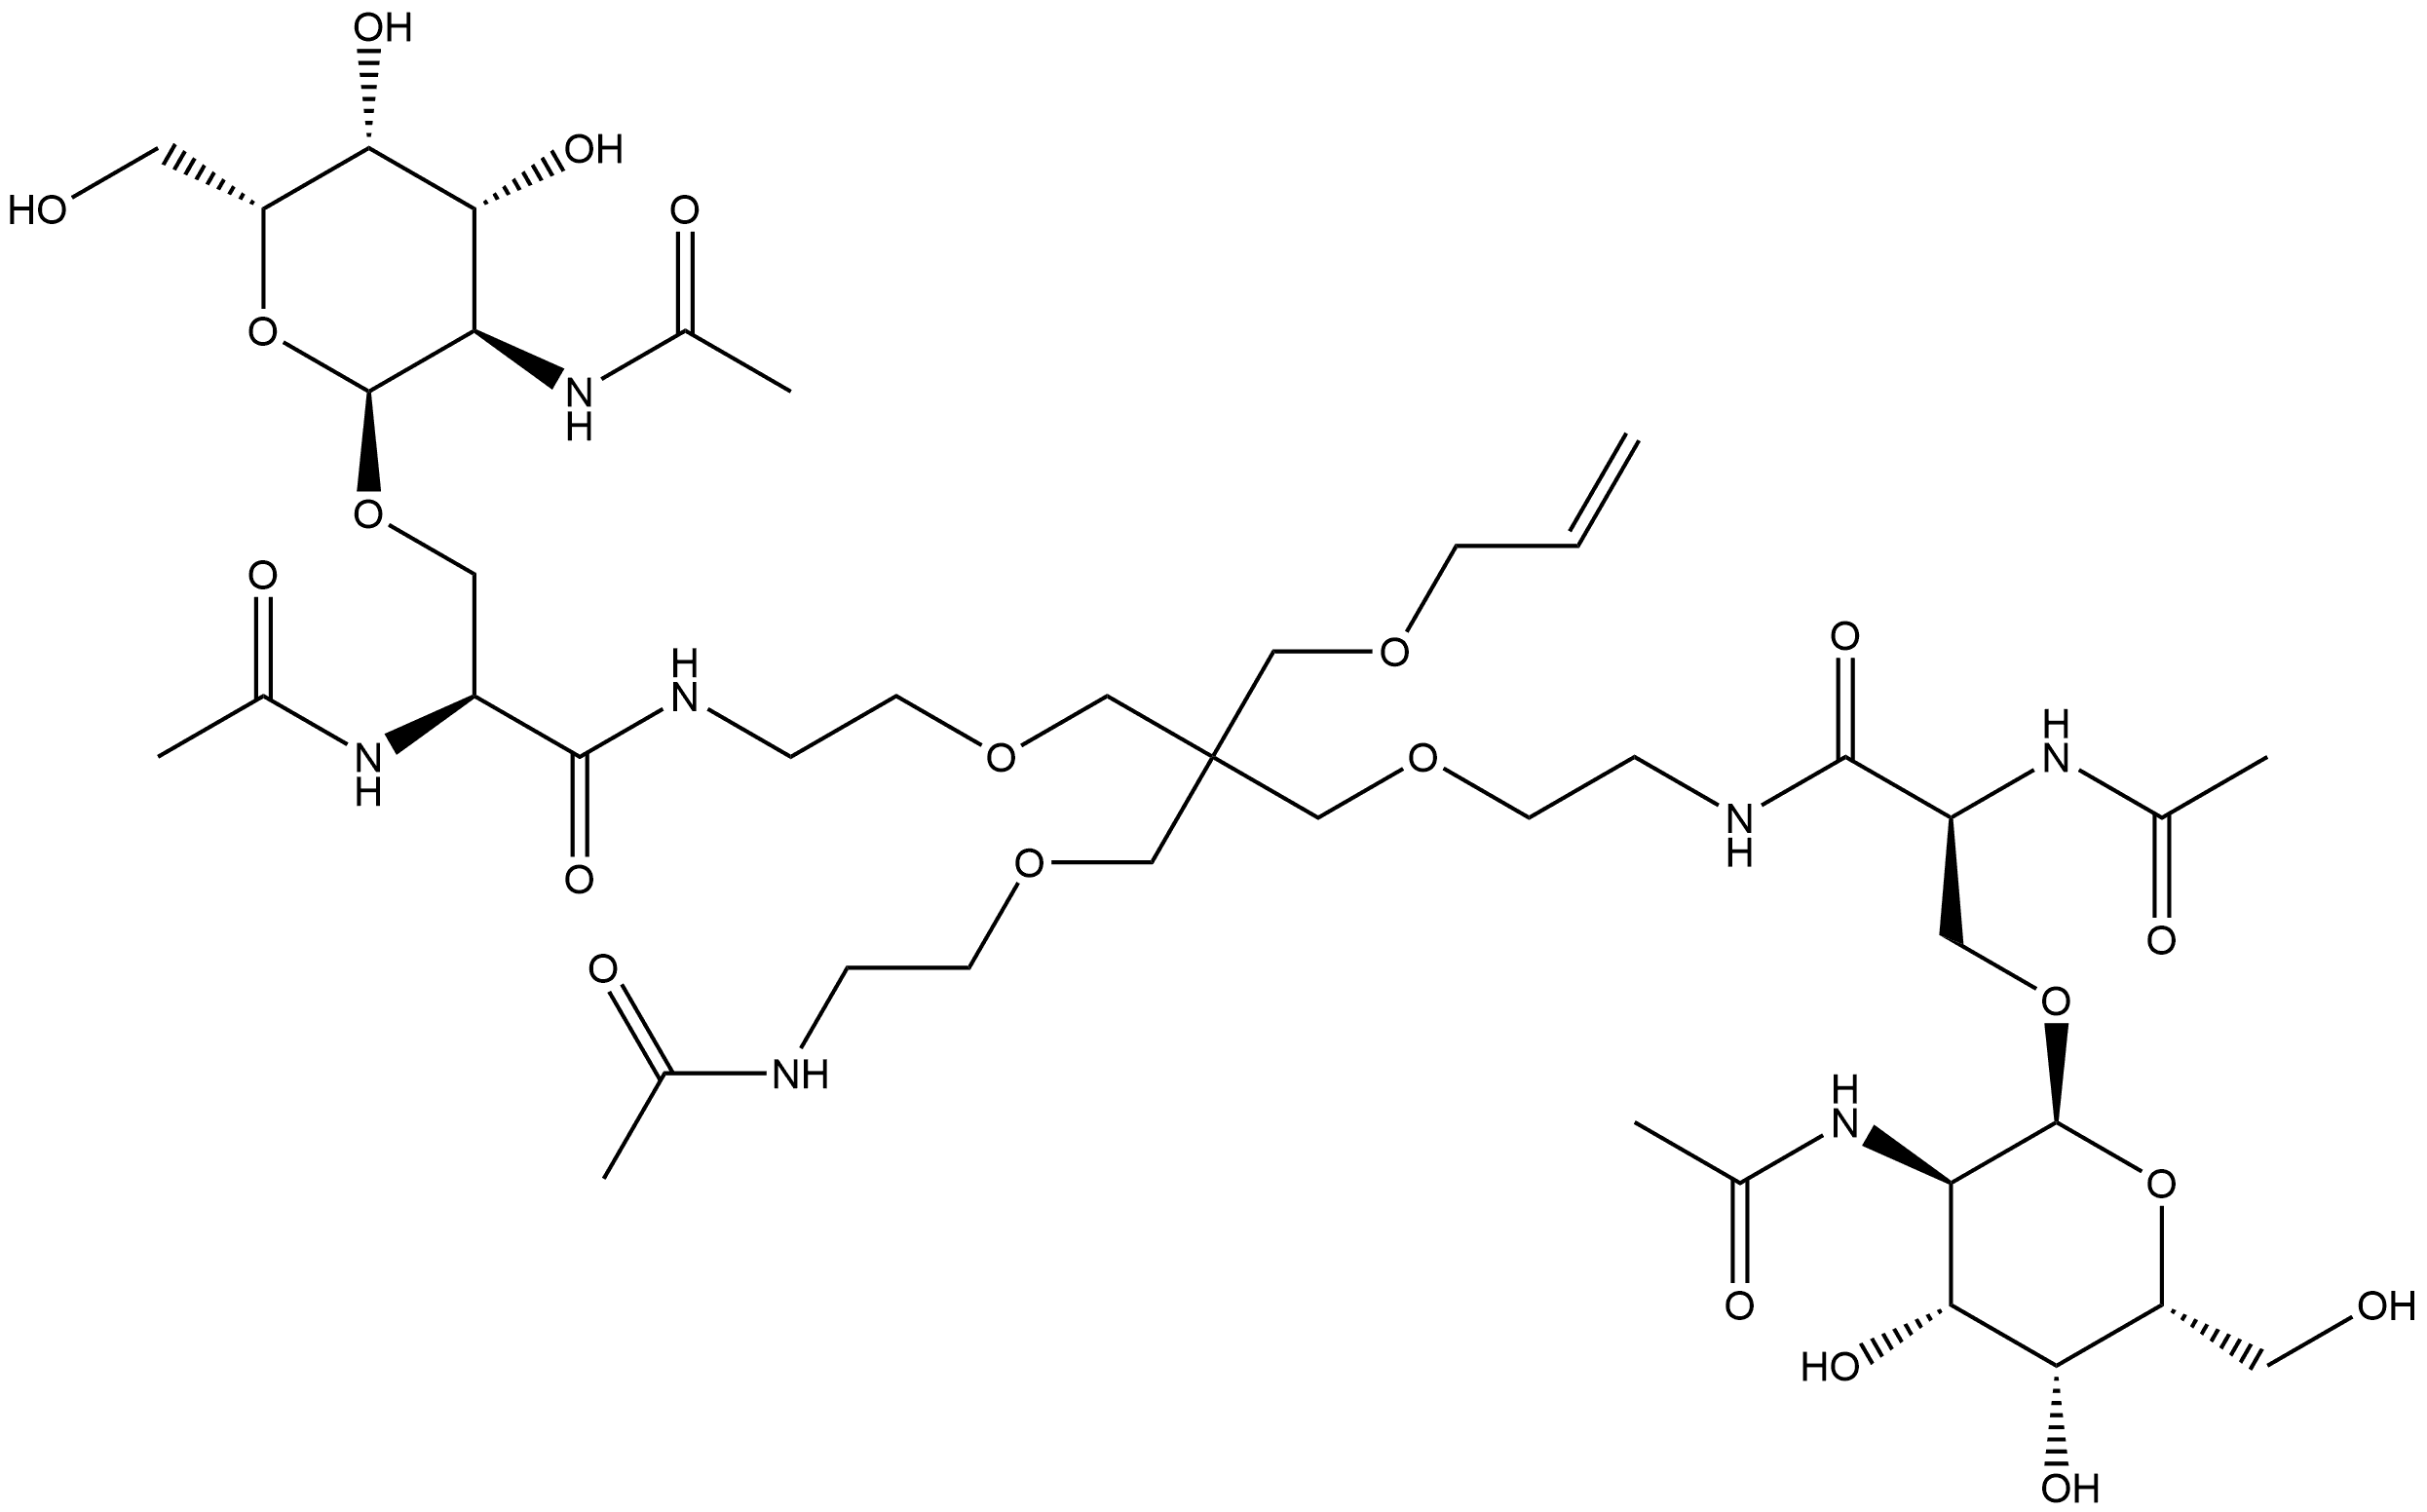 S-(R*,R*)]-N,N'-[[2-[[2-(acetylamino)ethoxy]methyl]-2-[(2-propenyloxy)methyl]-1,3-propanediyl]bis(oxy-2,1-ethanediyl)]bis[2-(acetylamino)-3-[[2-(acetylamino)-2-deoxy-α-D-galactopyranosyl]oxy]-Propanamide Structure